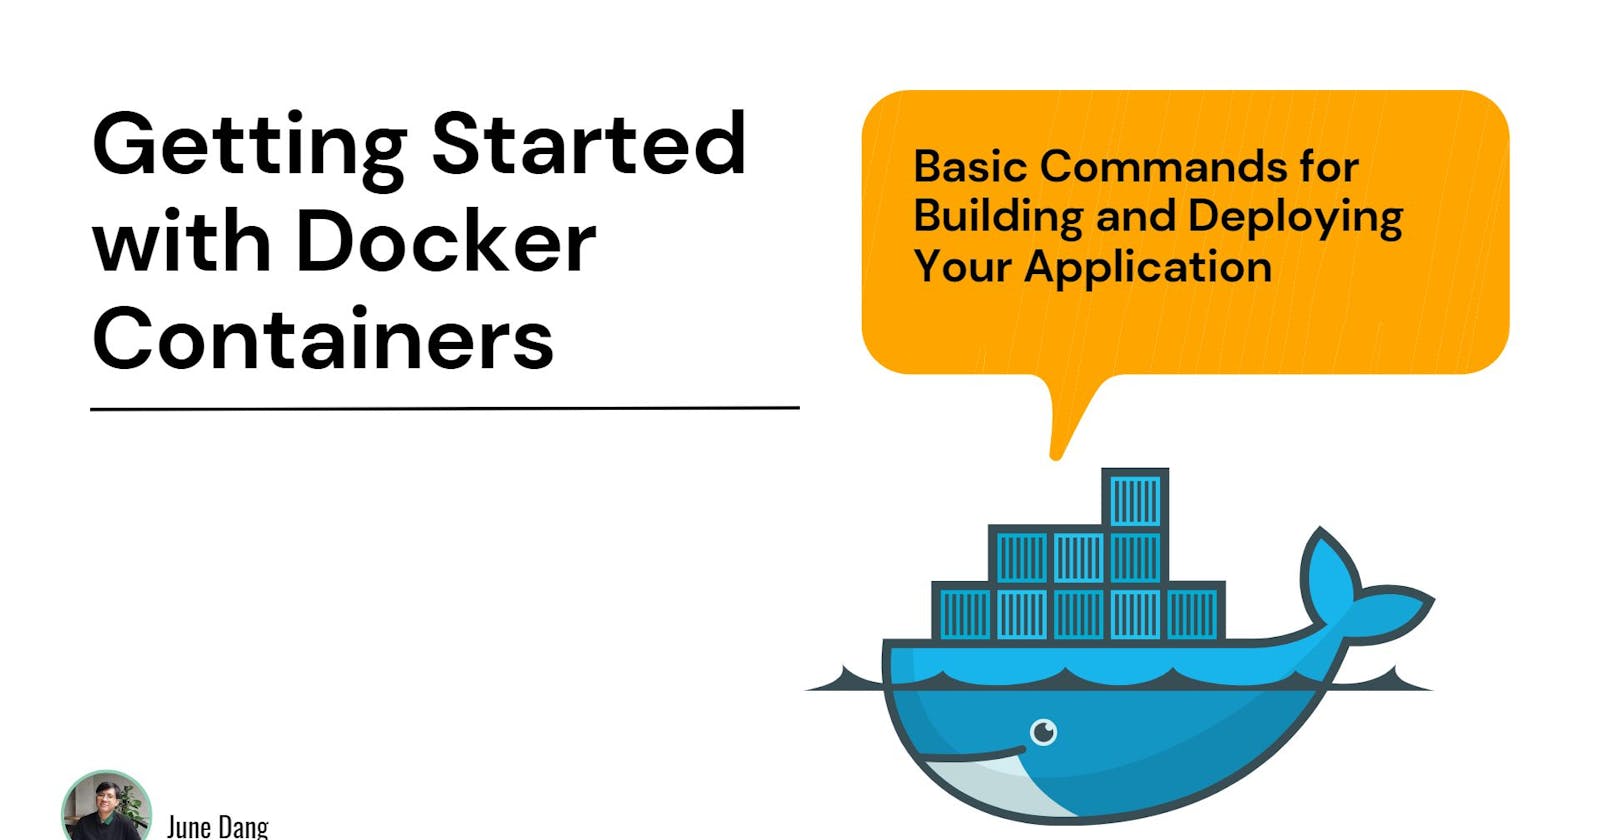 Getting Started with Docker Containers: Basic Commands for Building and Deploying Your Application